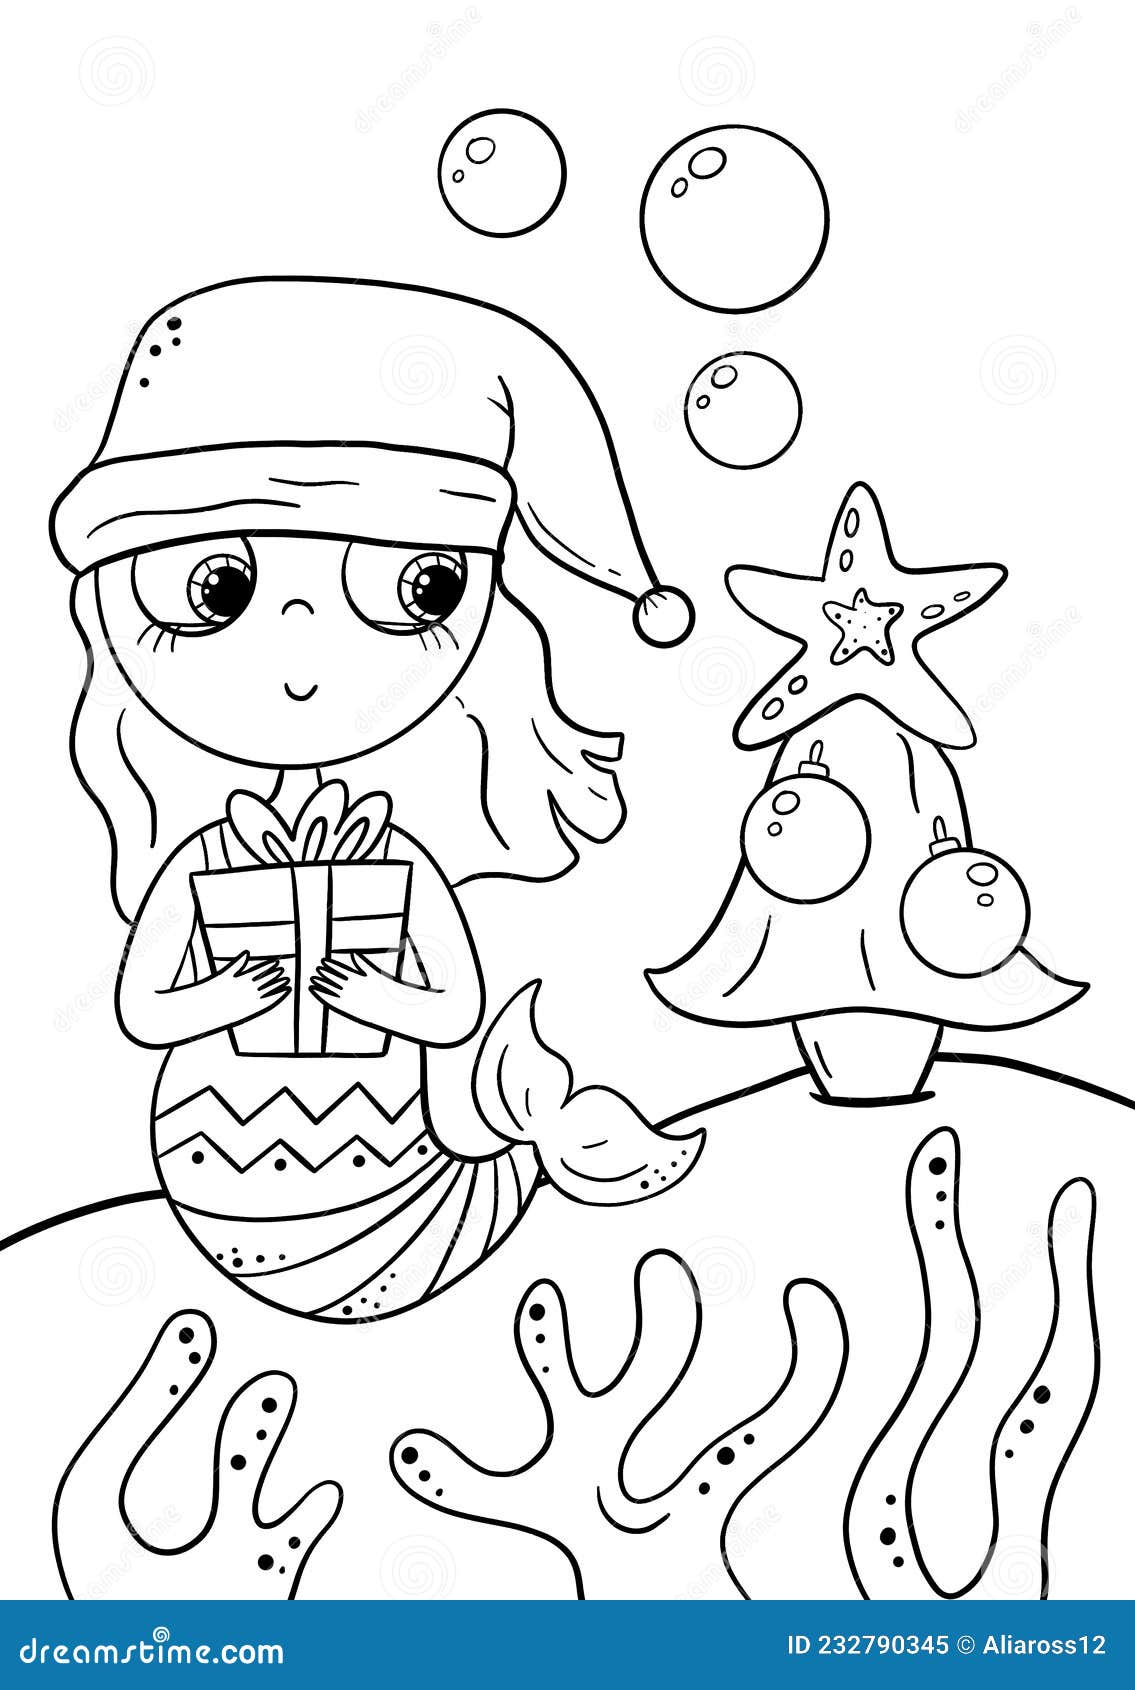 25 Christmas Themed Anime Coloring Pages by Sarah Hampton | TPT